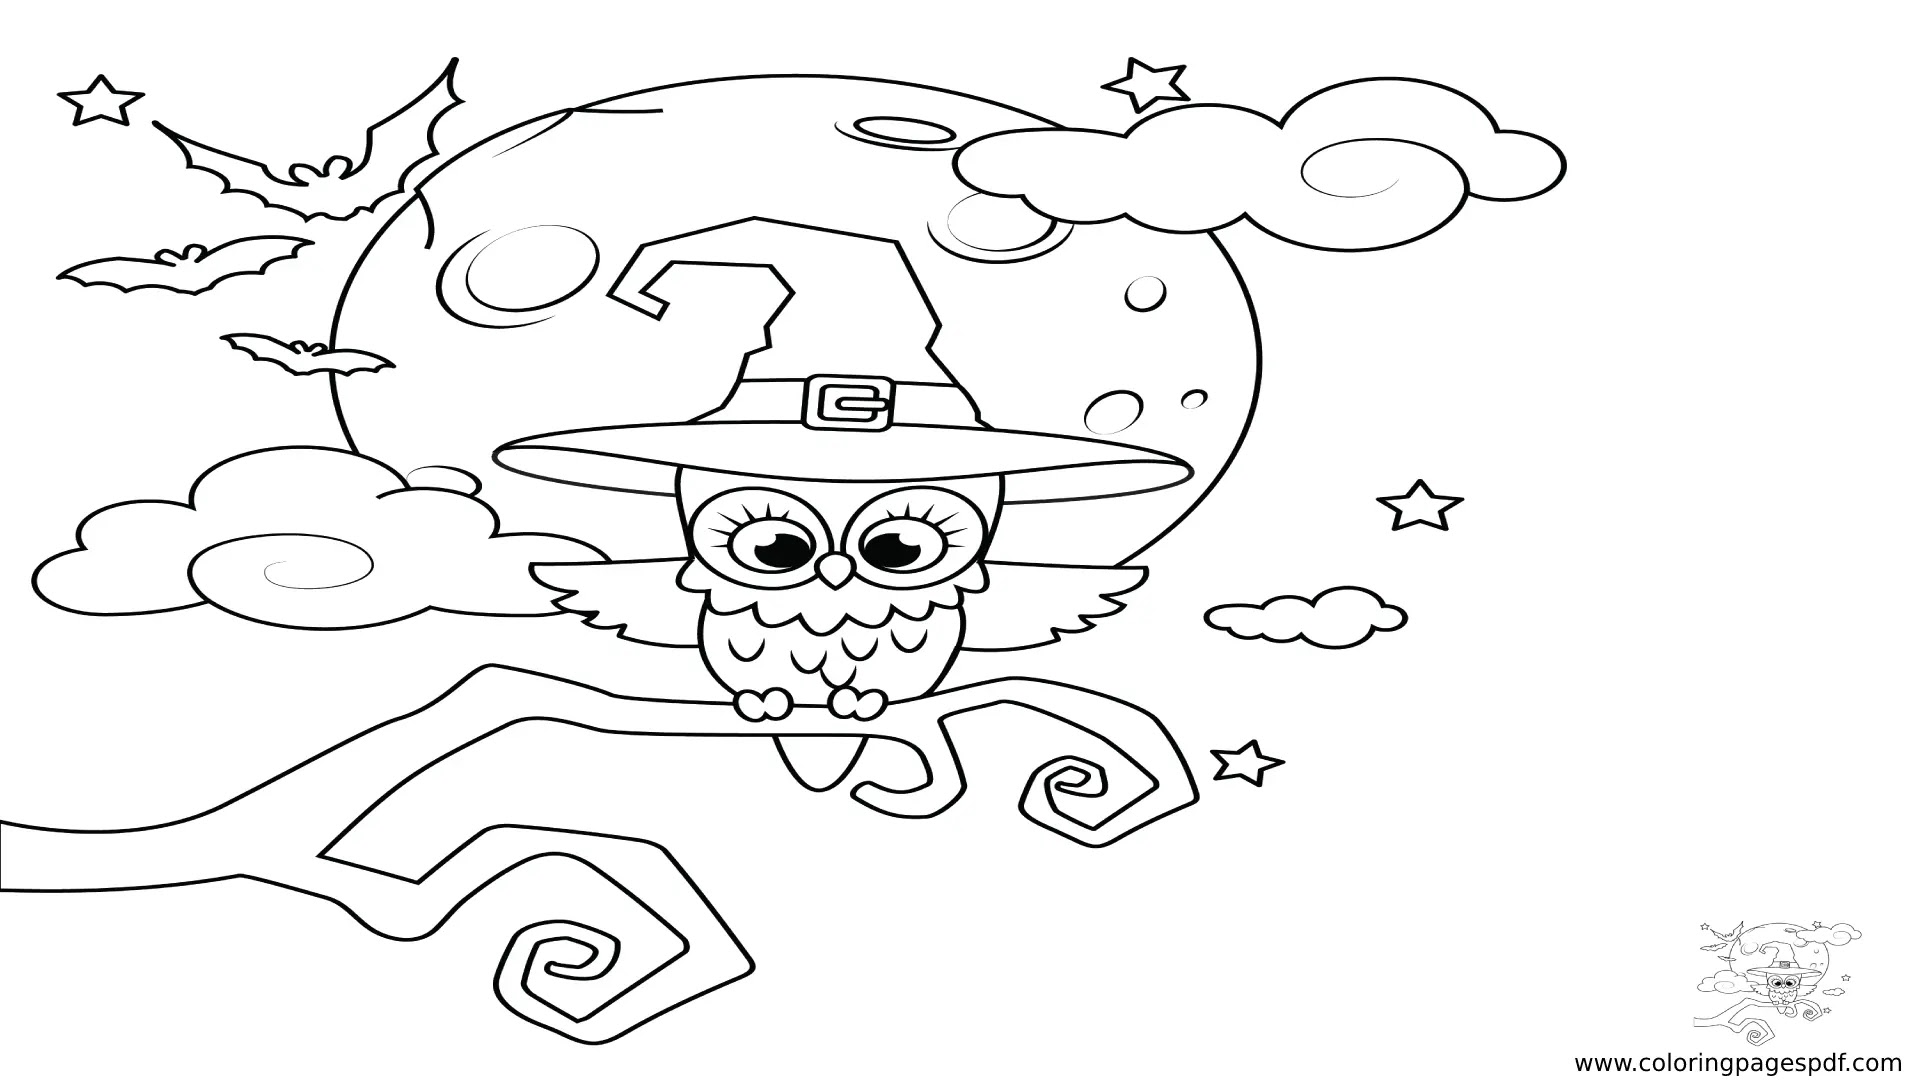 Coloring Page Of An Owl Wearing A Witch Hat